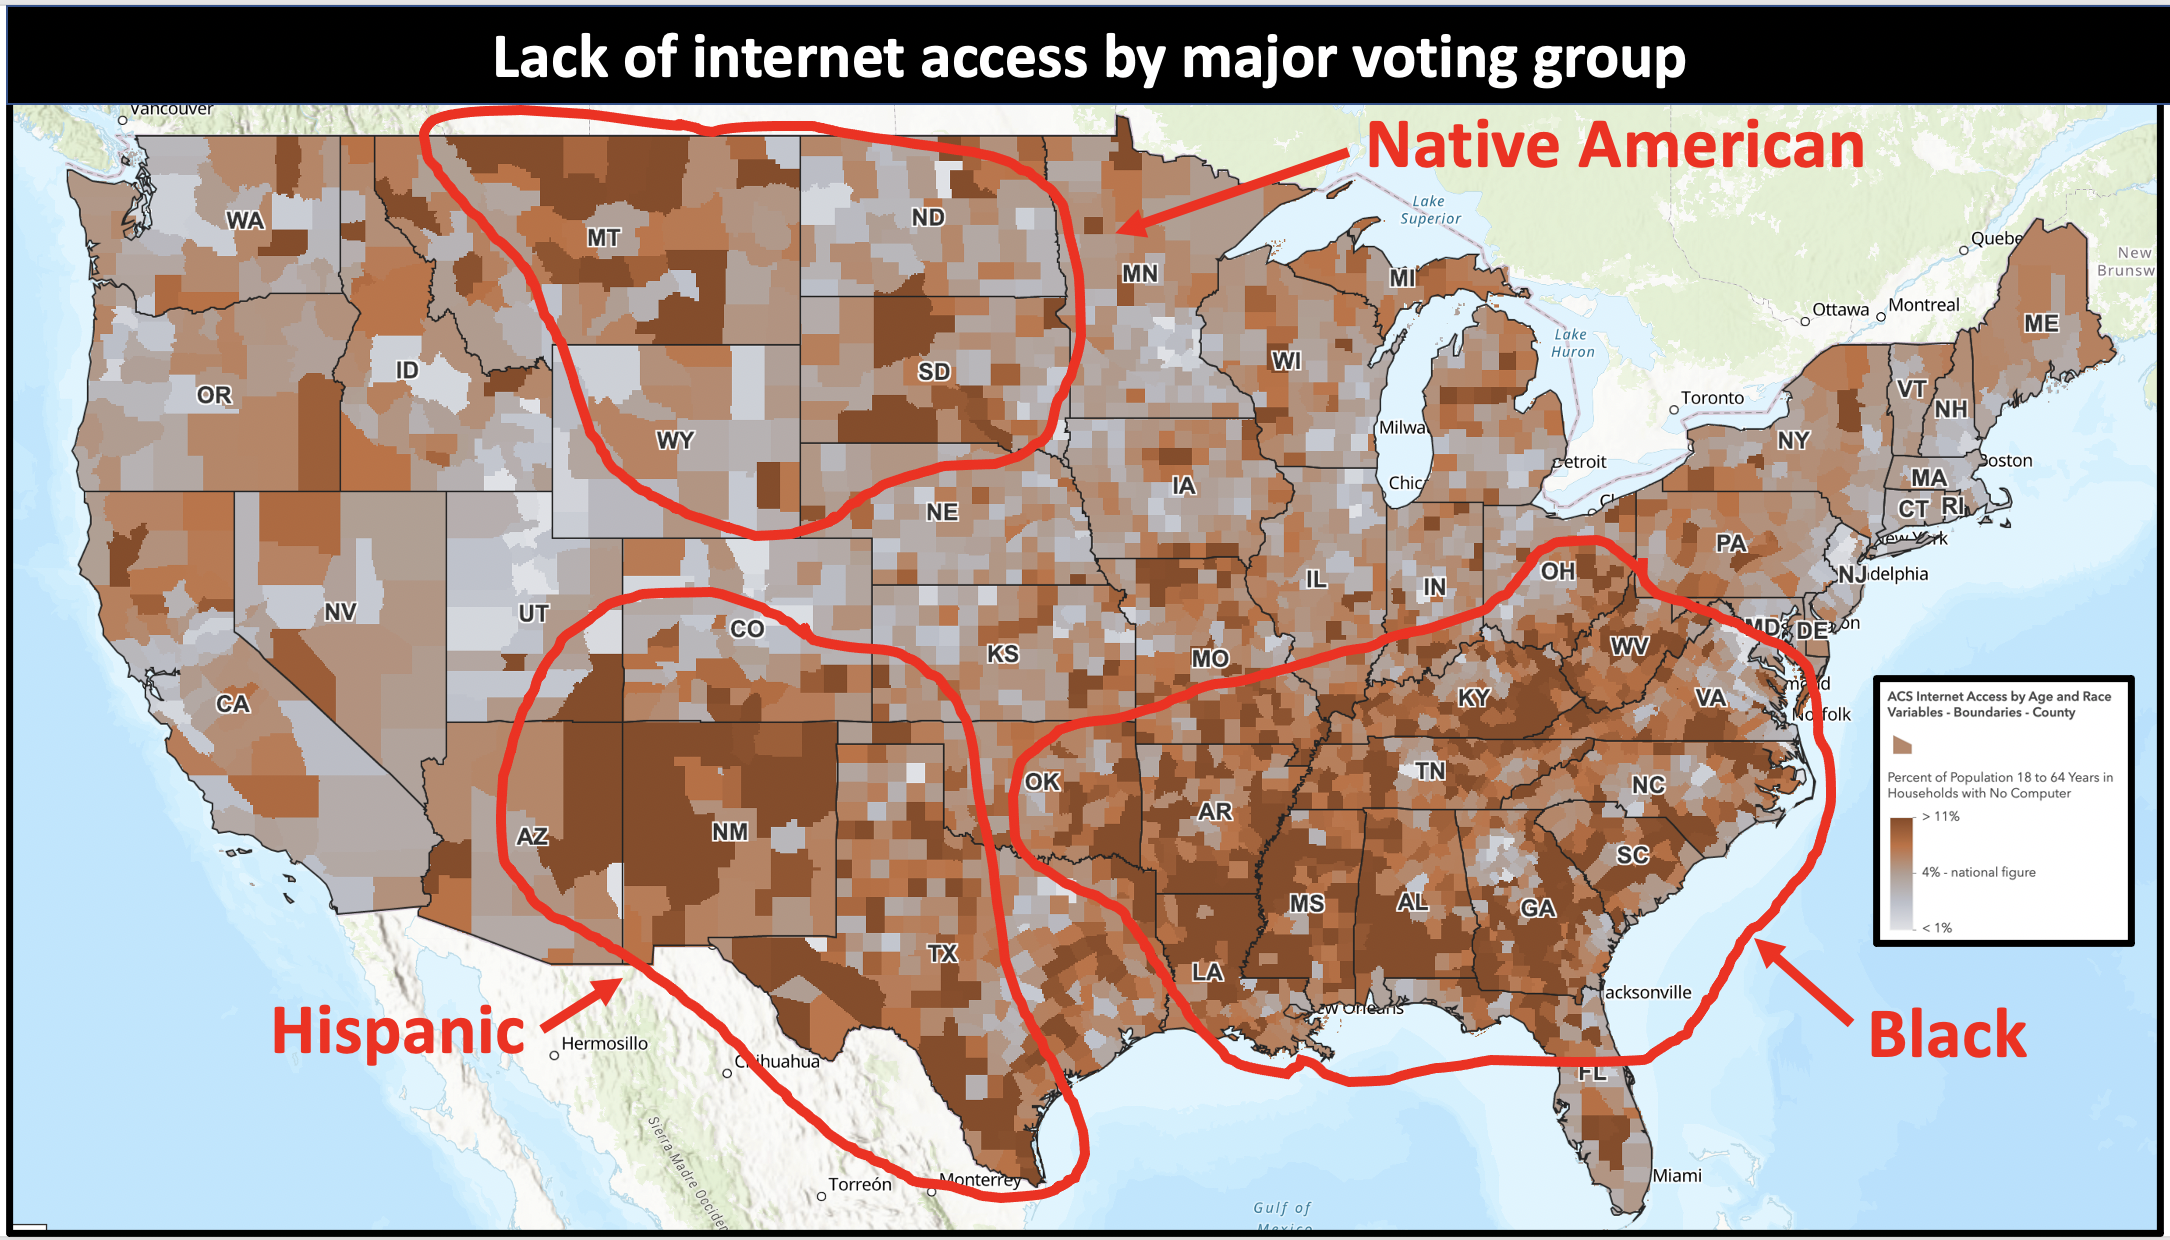 Many Black, Brown and Indigenous voters are disenfranchised by denying them access to the internet where they can get information on how to vote.